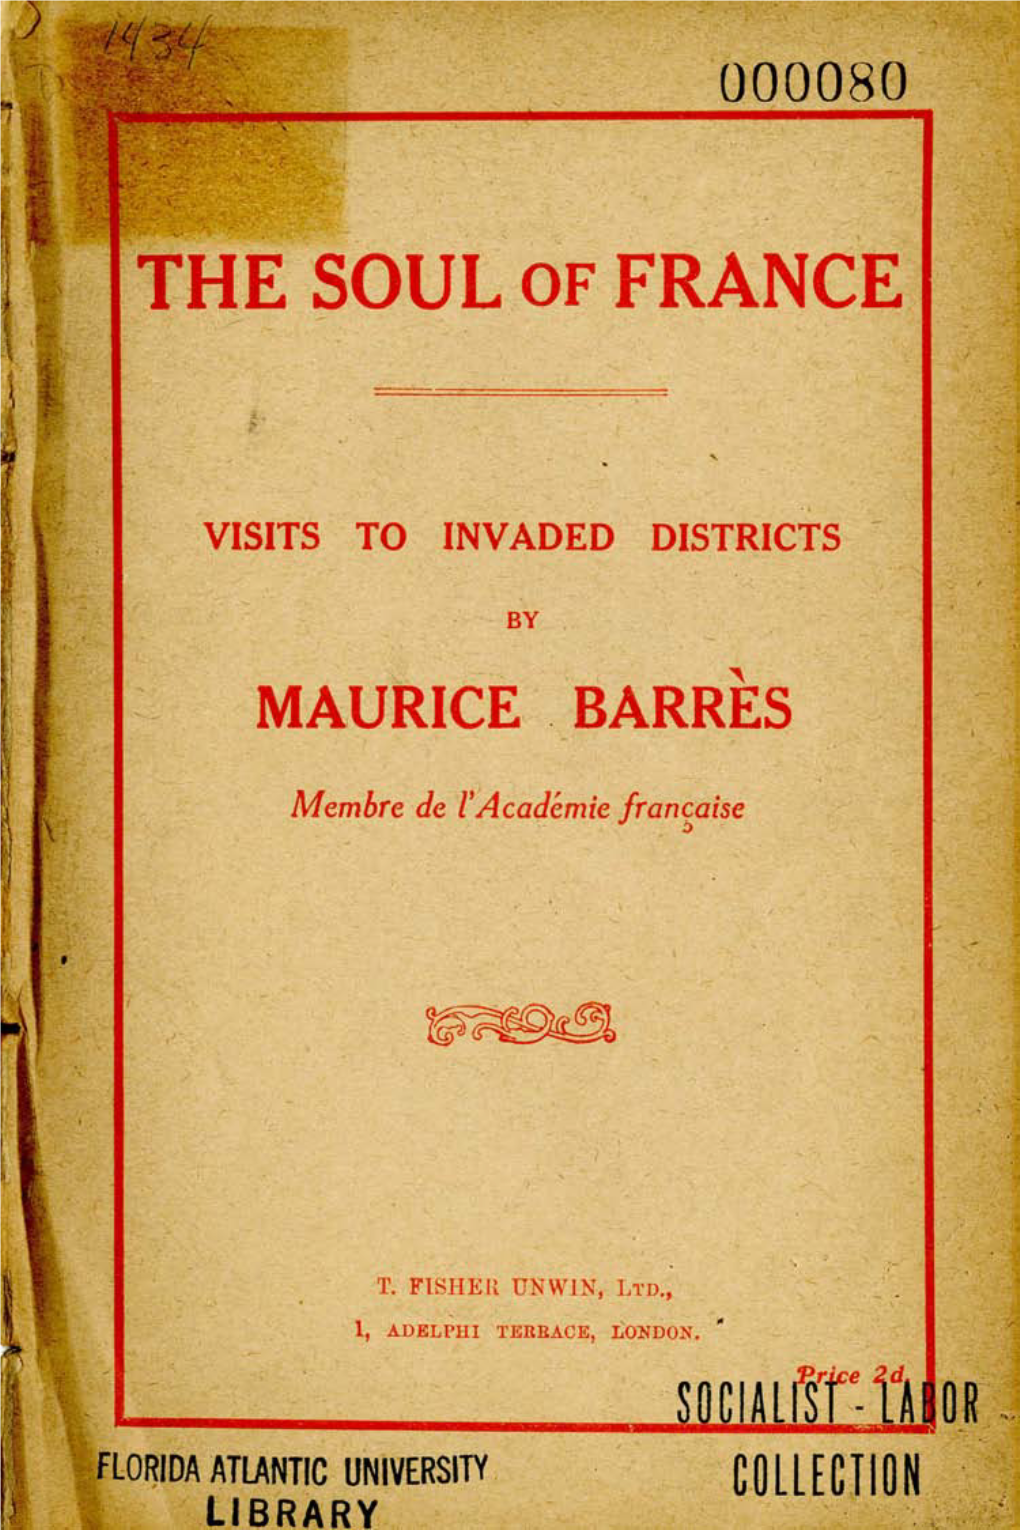 The Soul of France